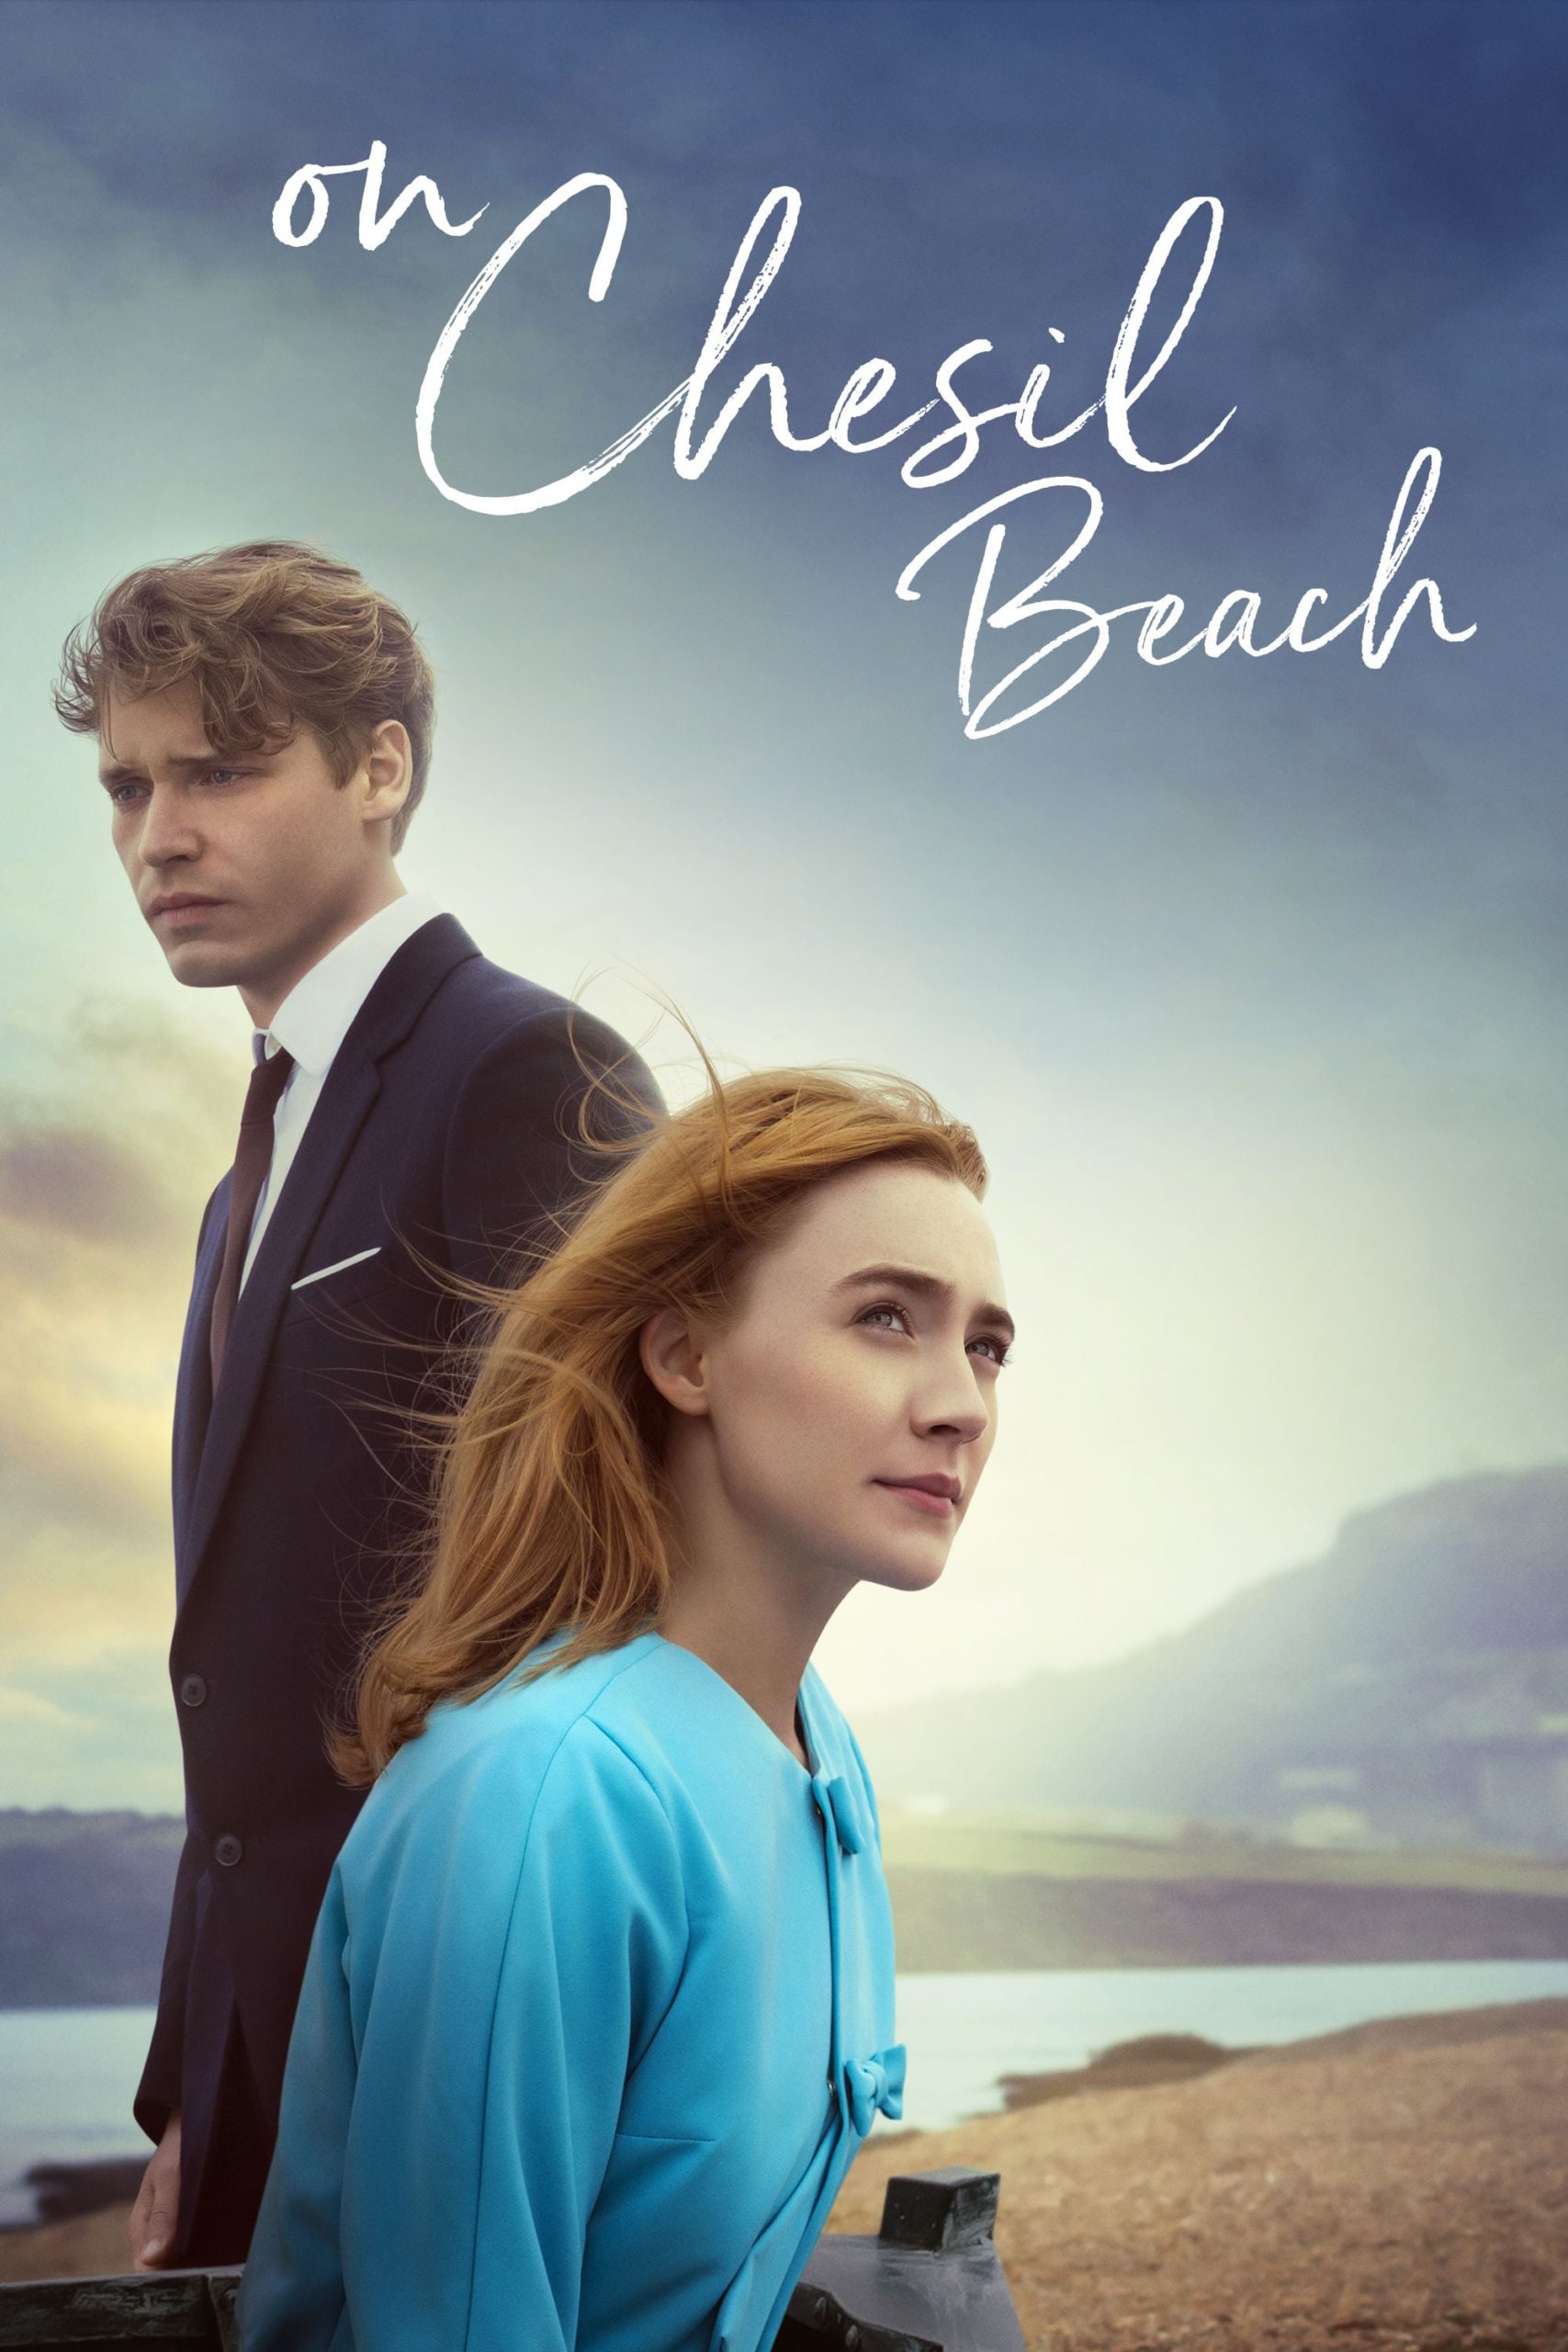 Poster for the movie "On Chesil Beach"